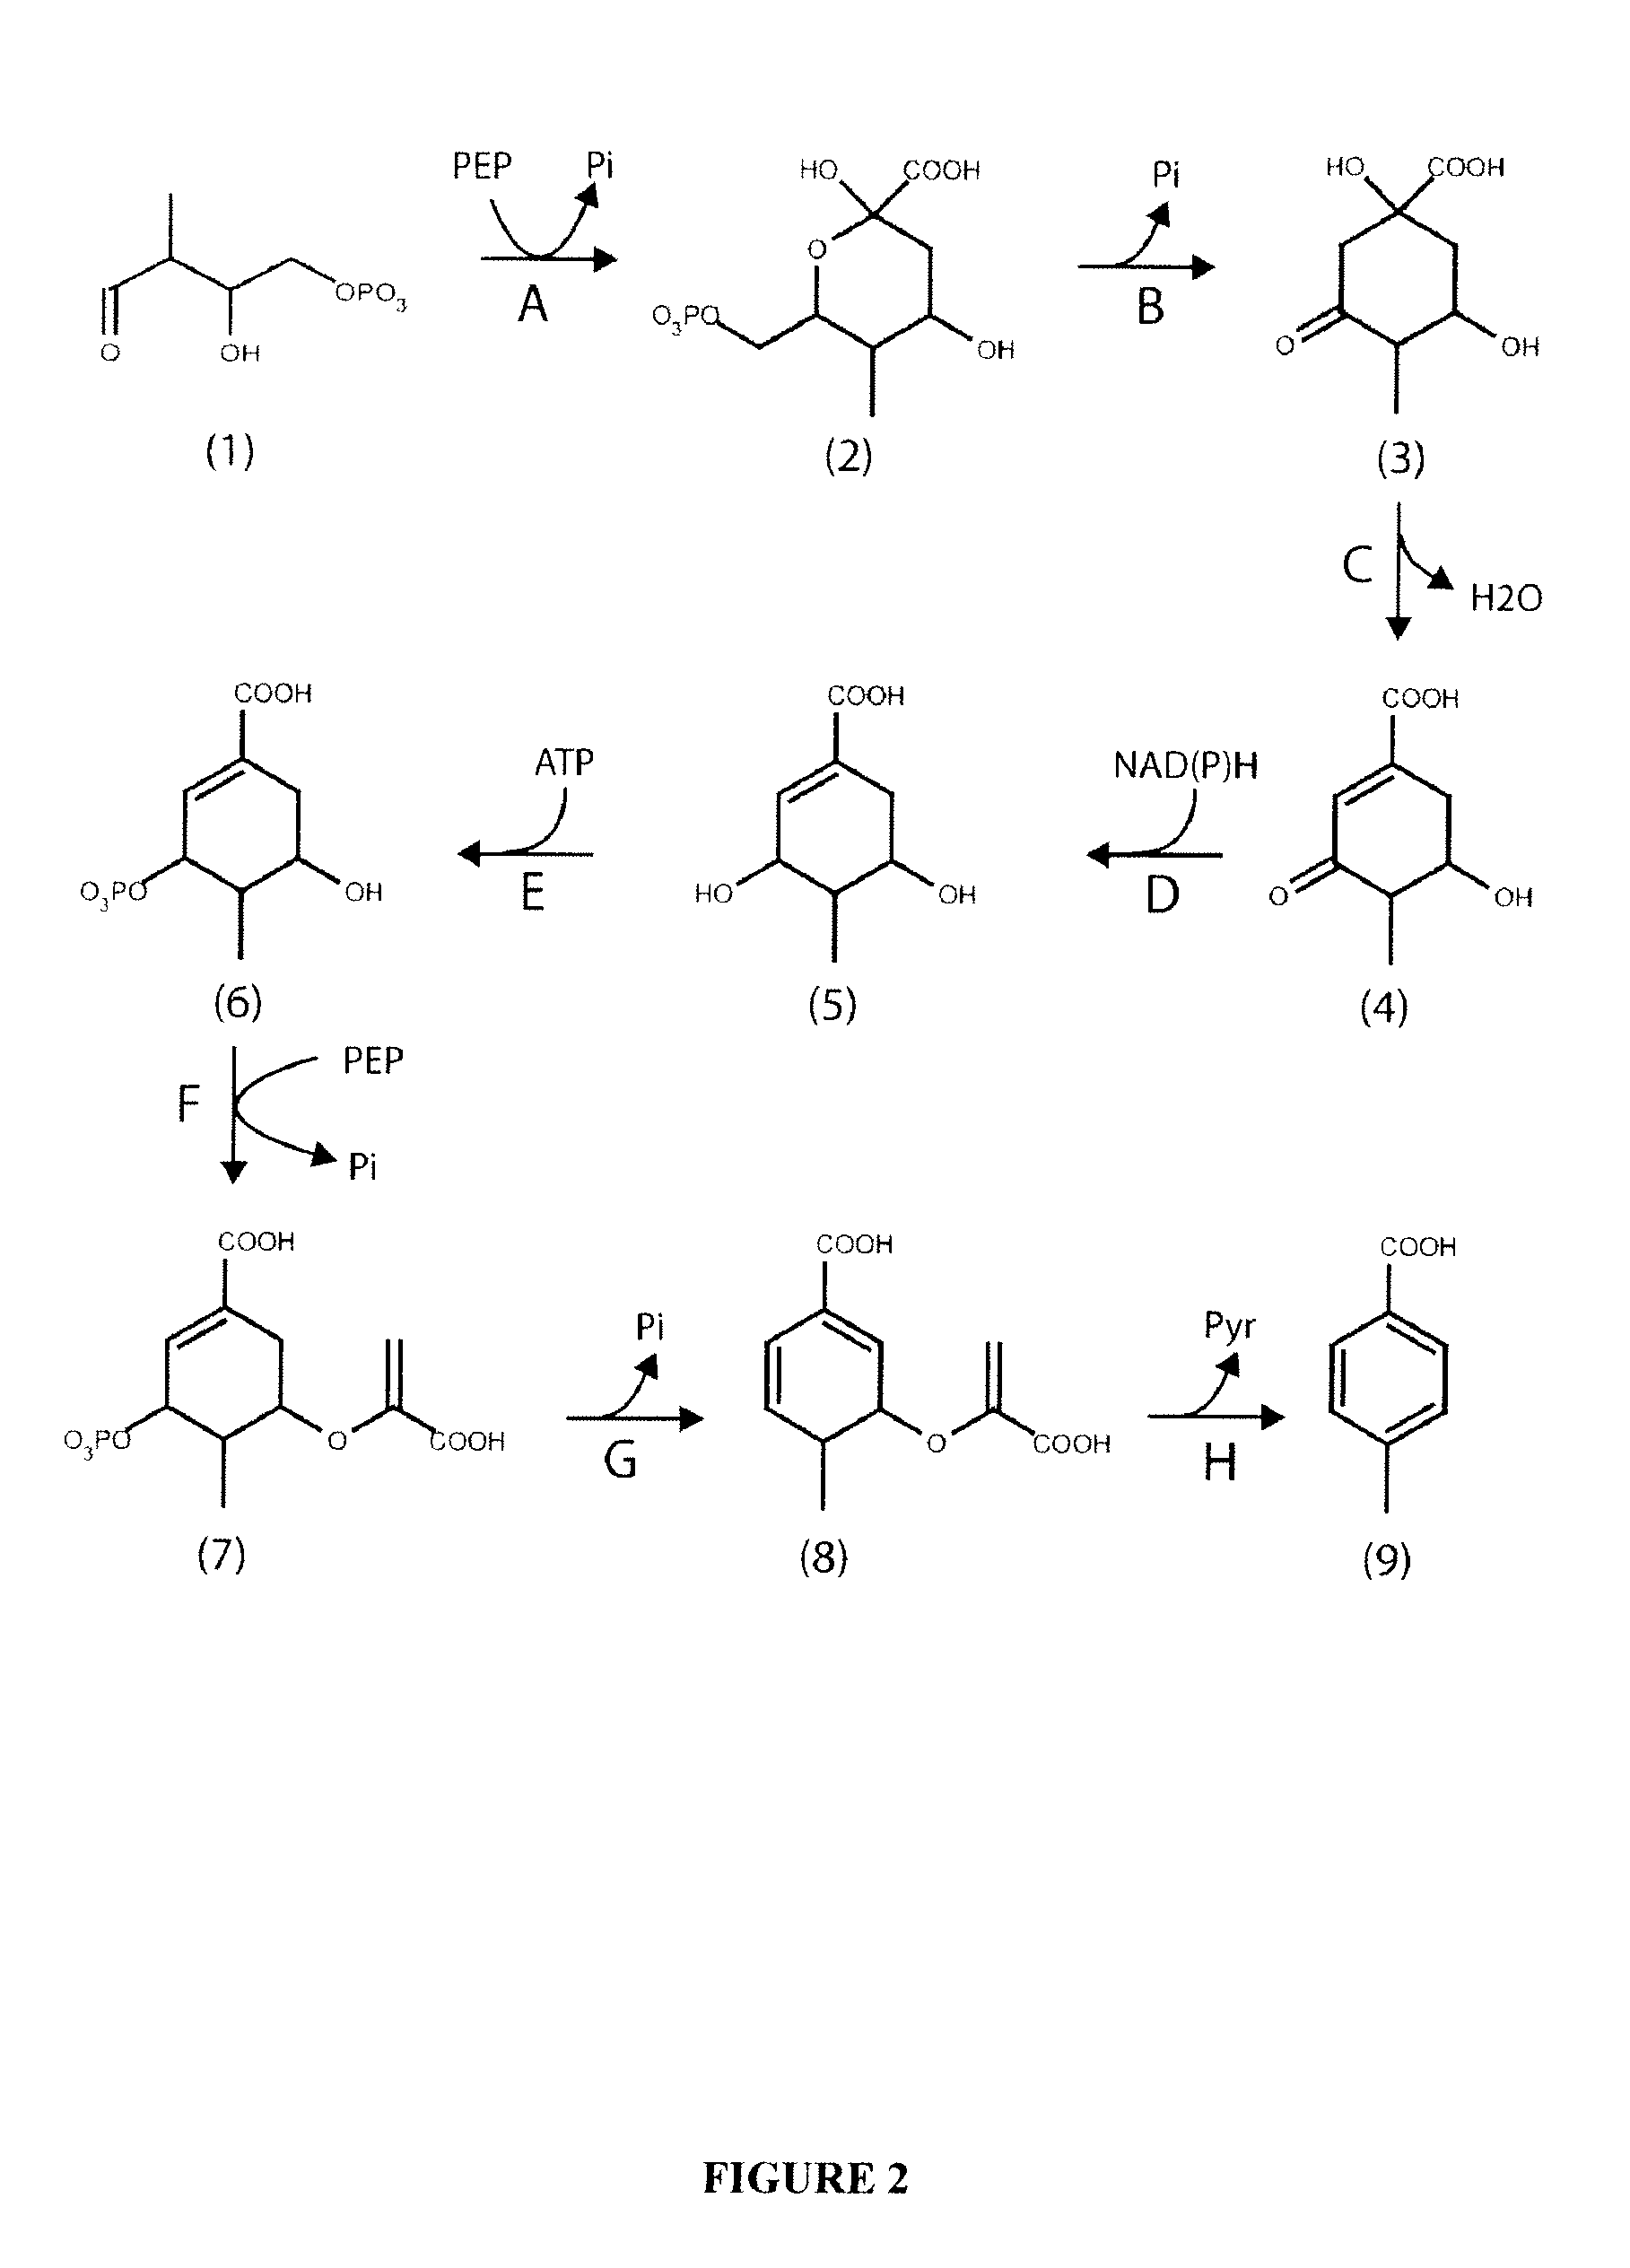 Microorganisms and methods for the biosynthesis of p-toluate and terephthalate